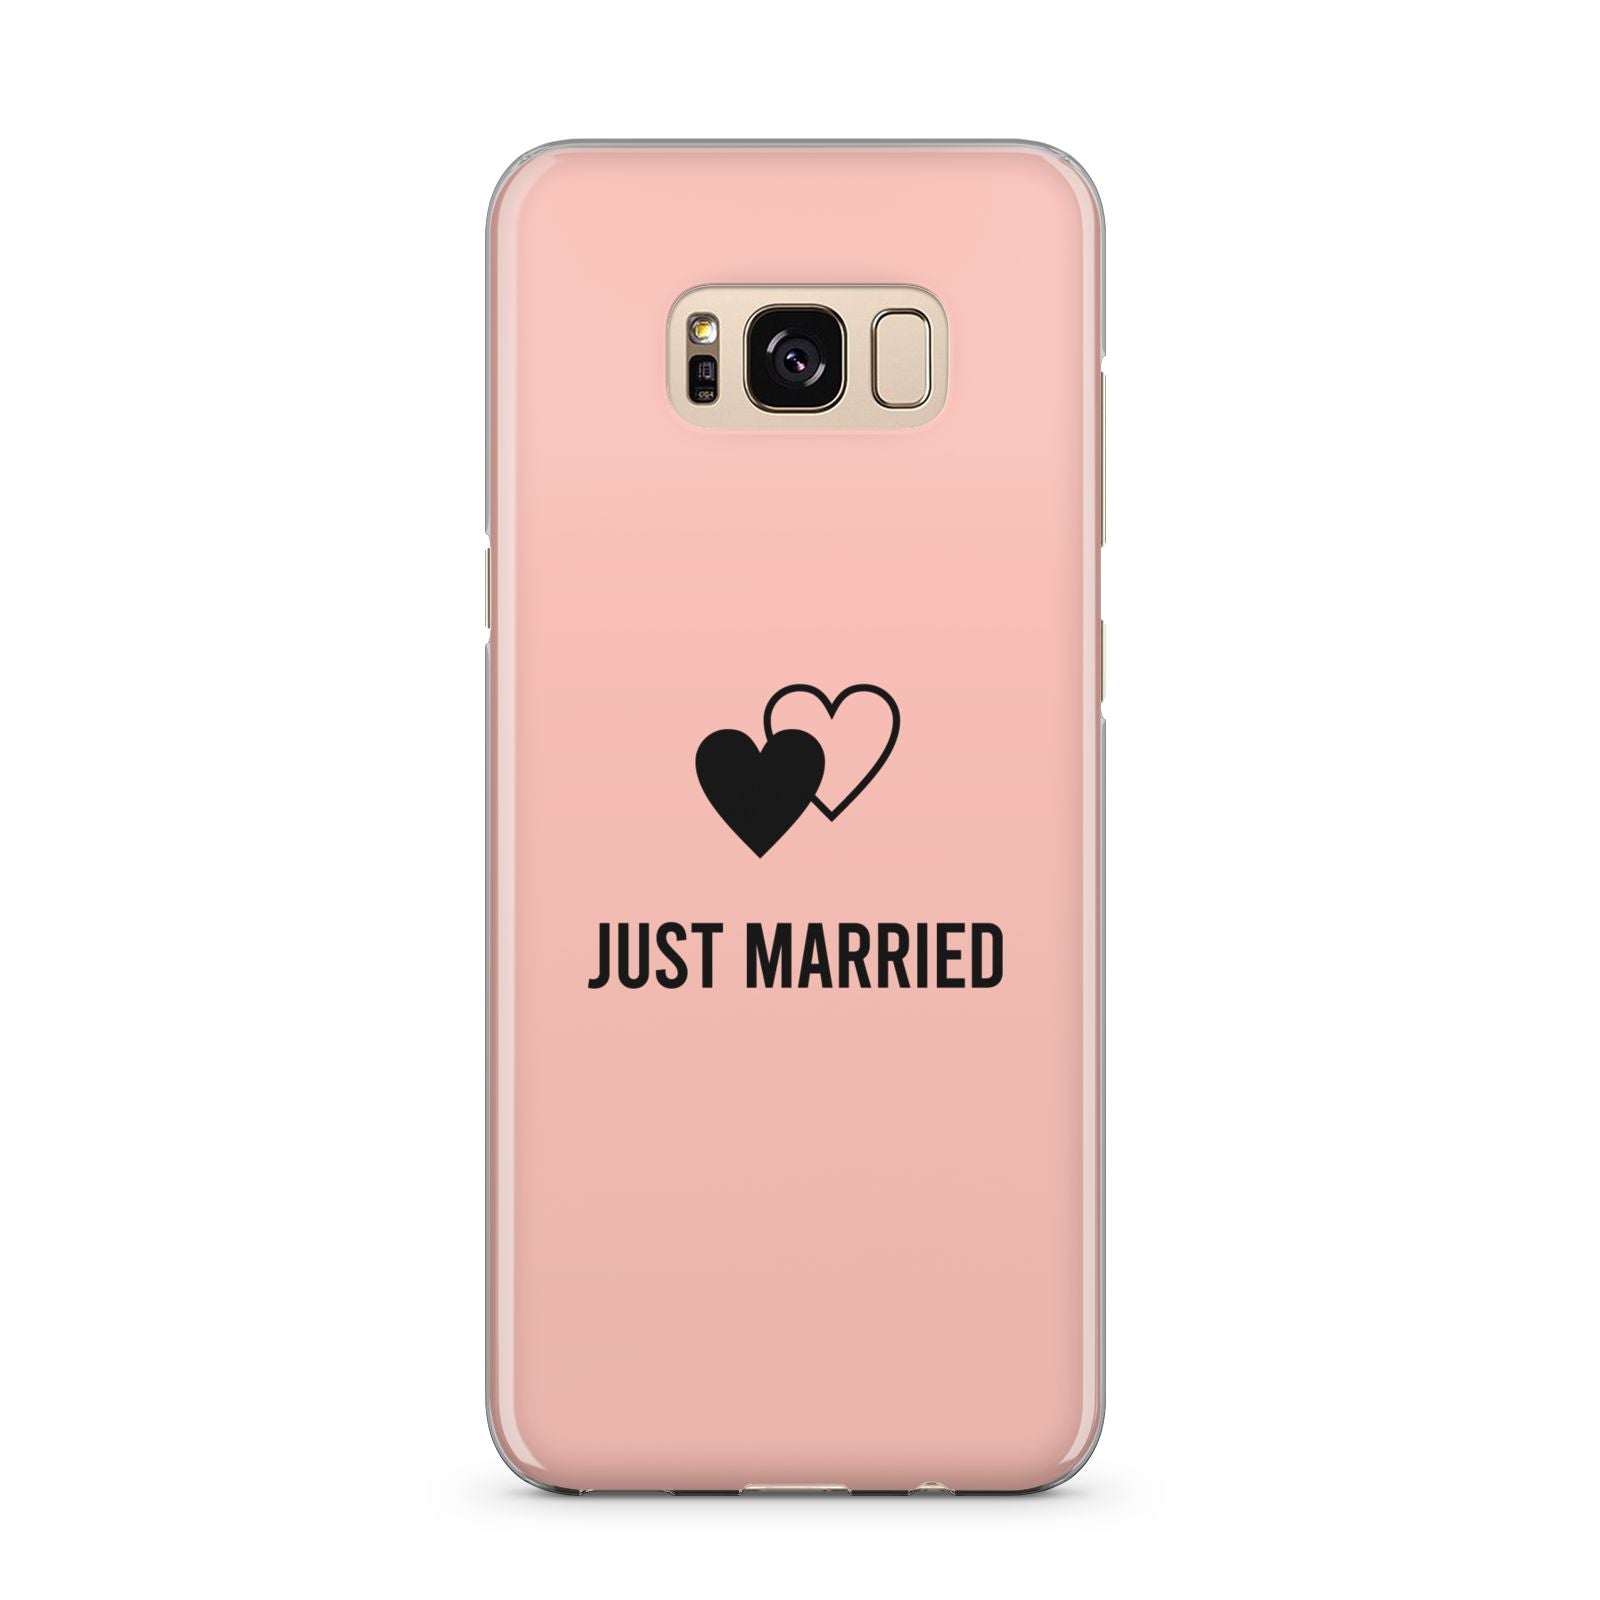 Just Married Samsung Galaxy S8 Plus Case